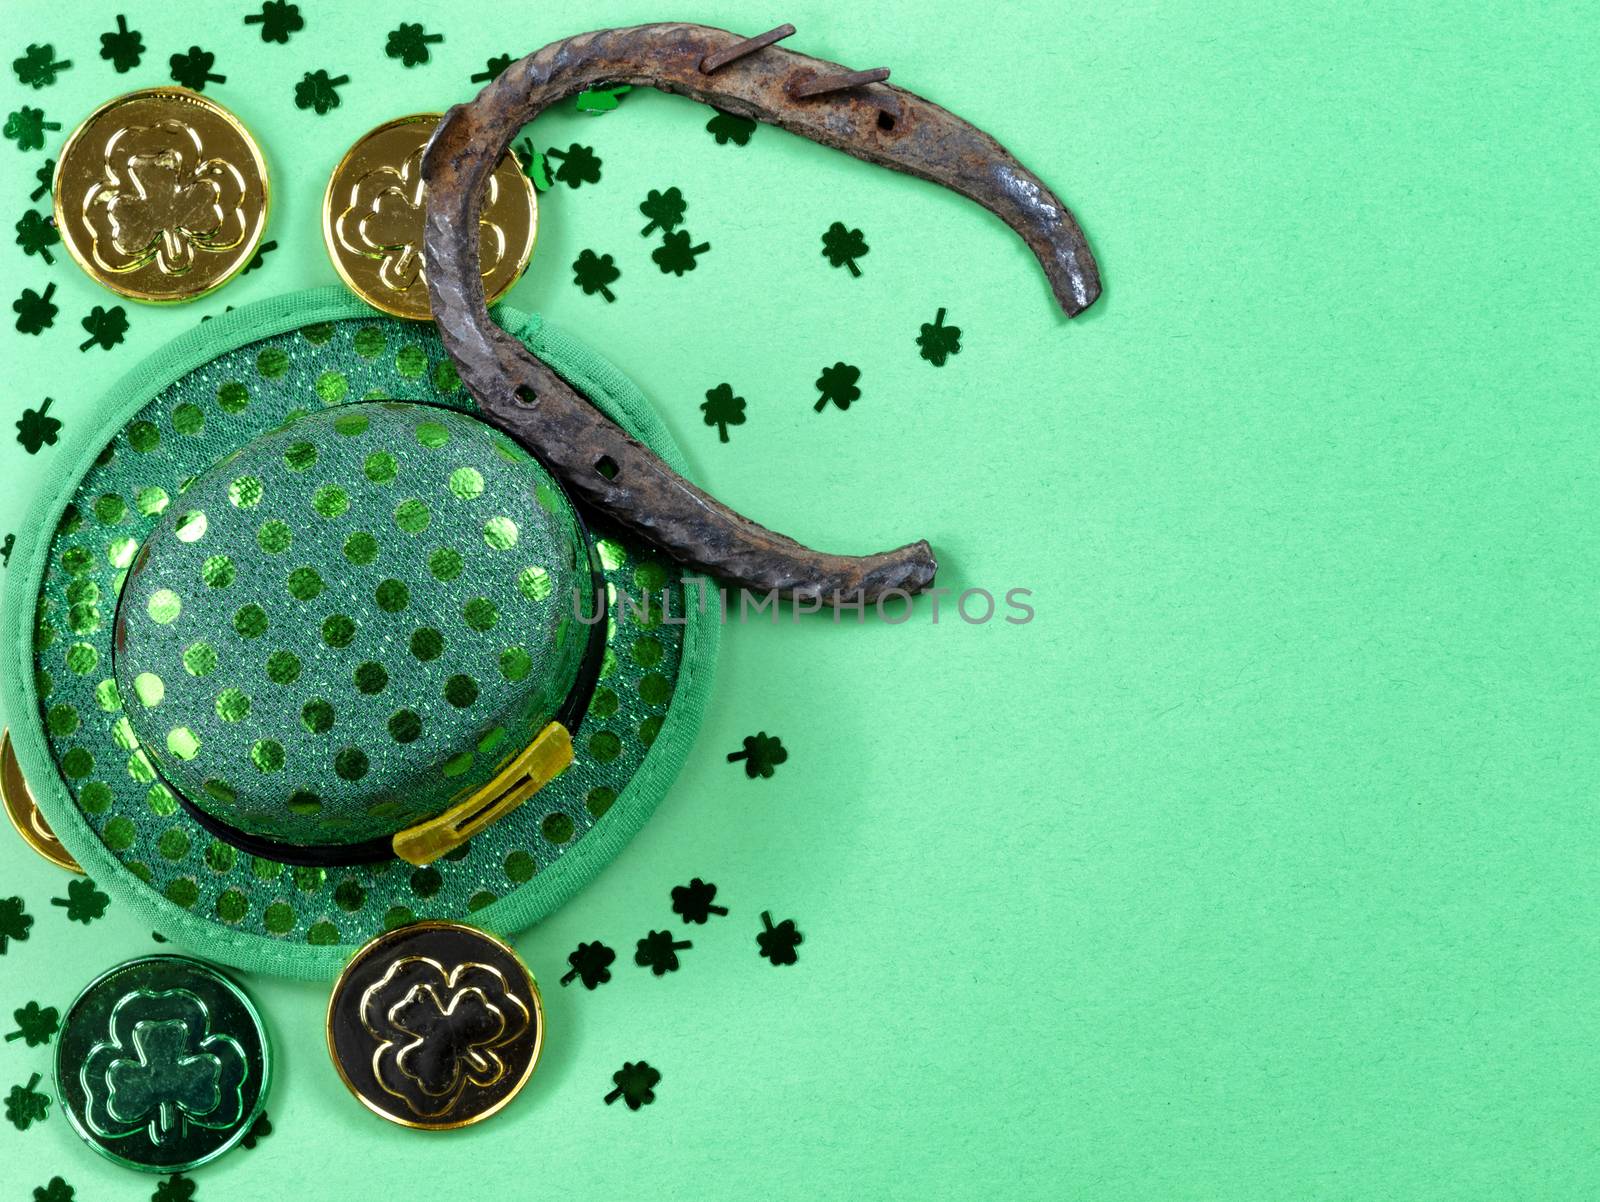 St Patricks Day with border of shamrocks and good luck objects o by tab1962